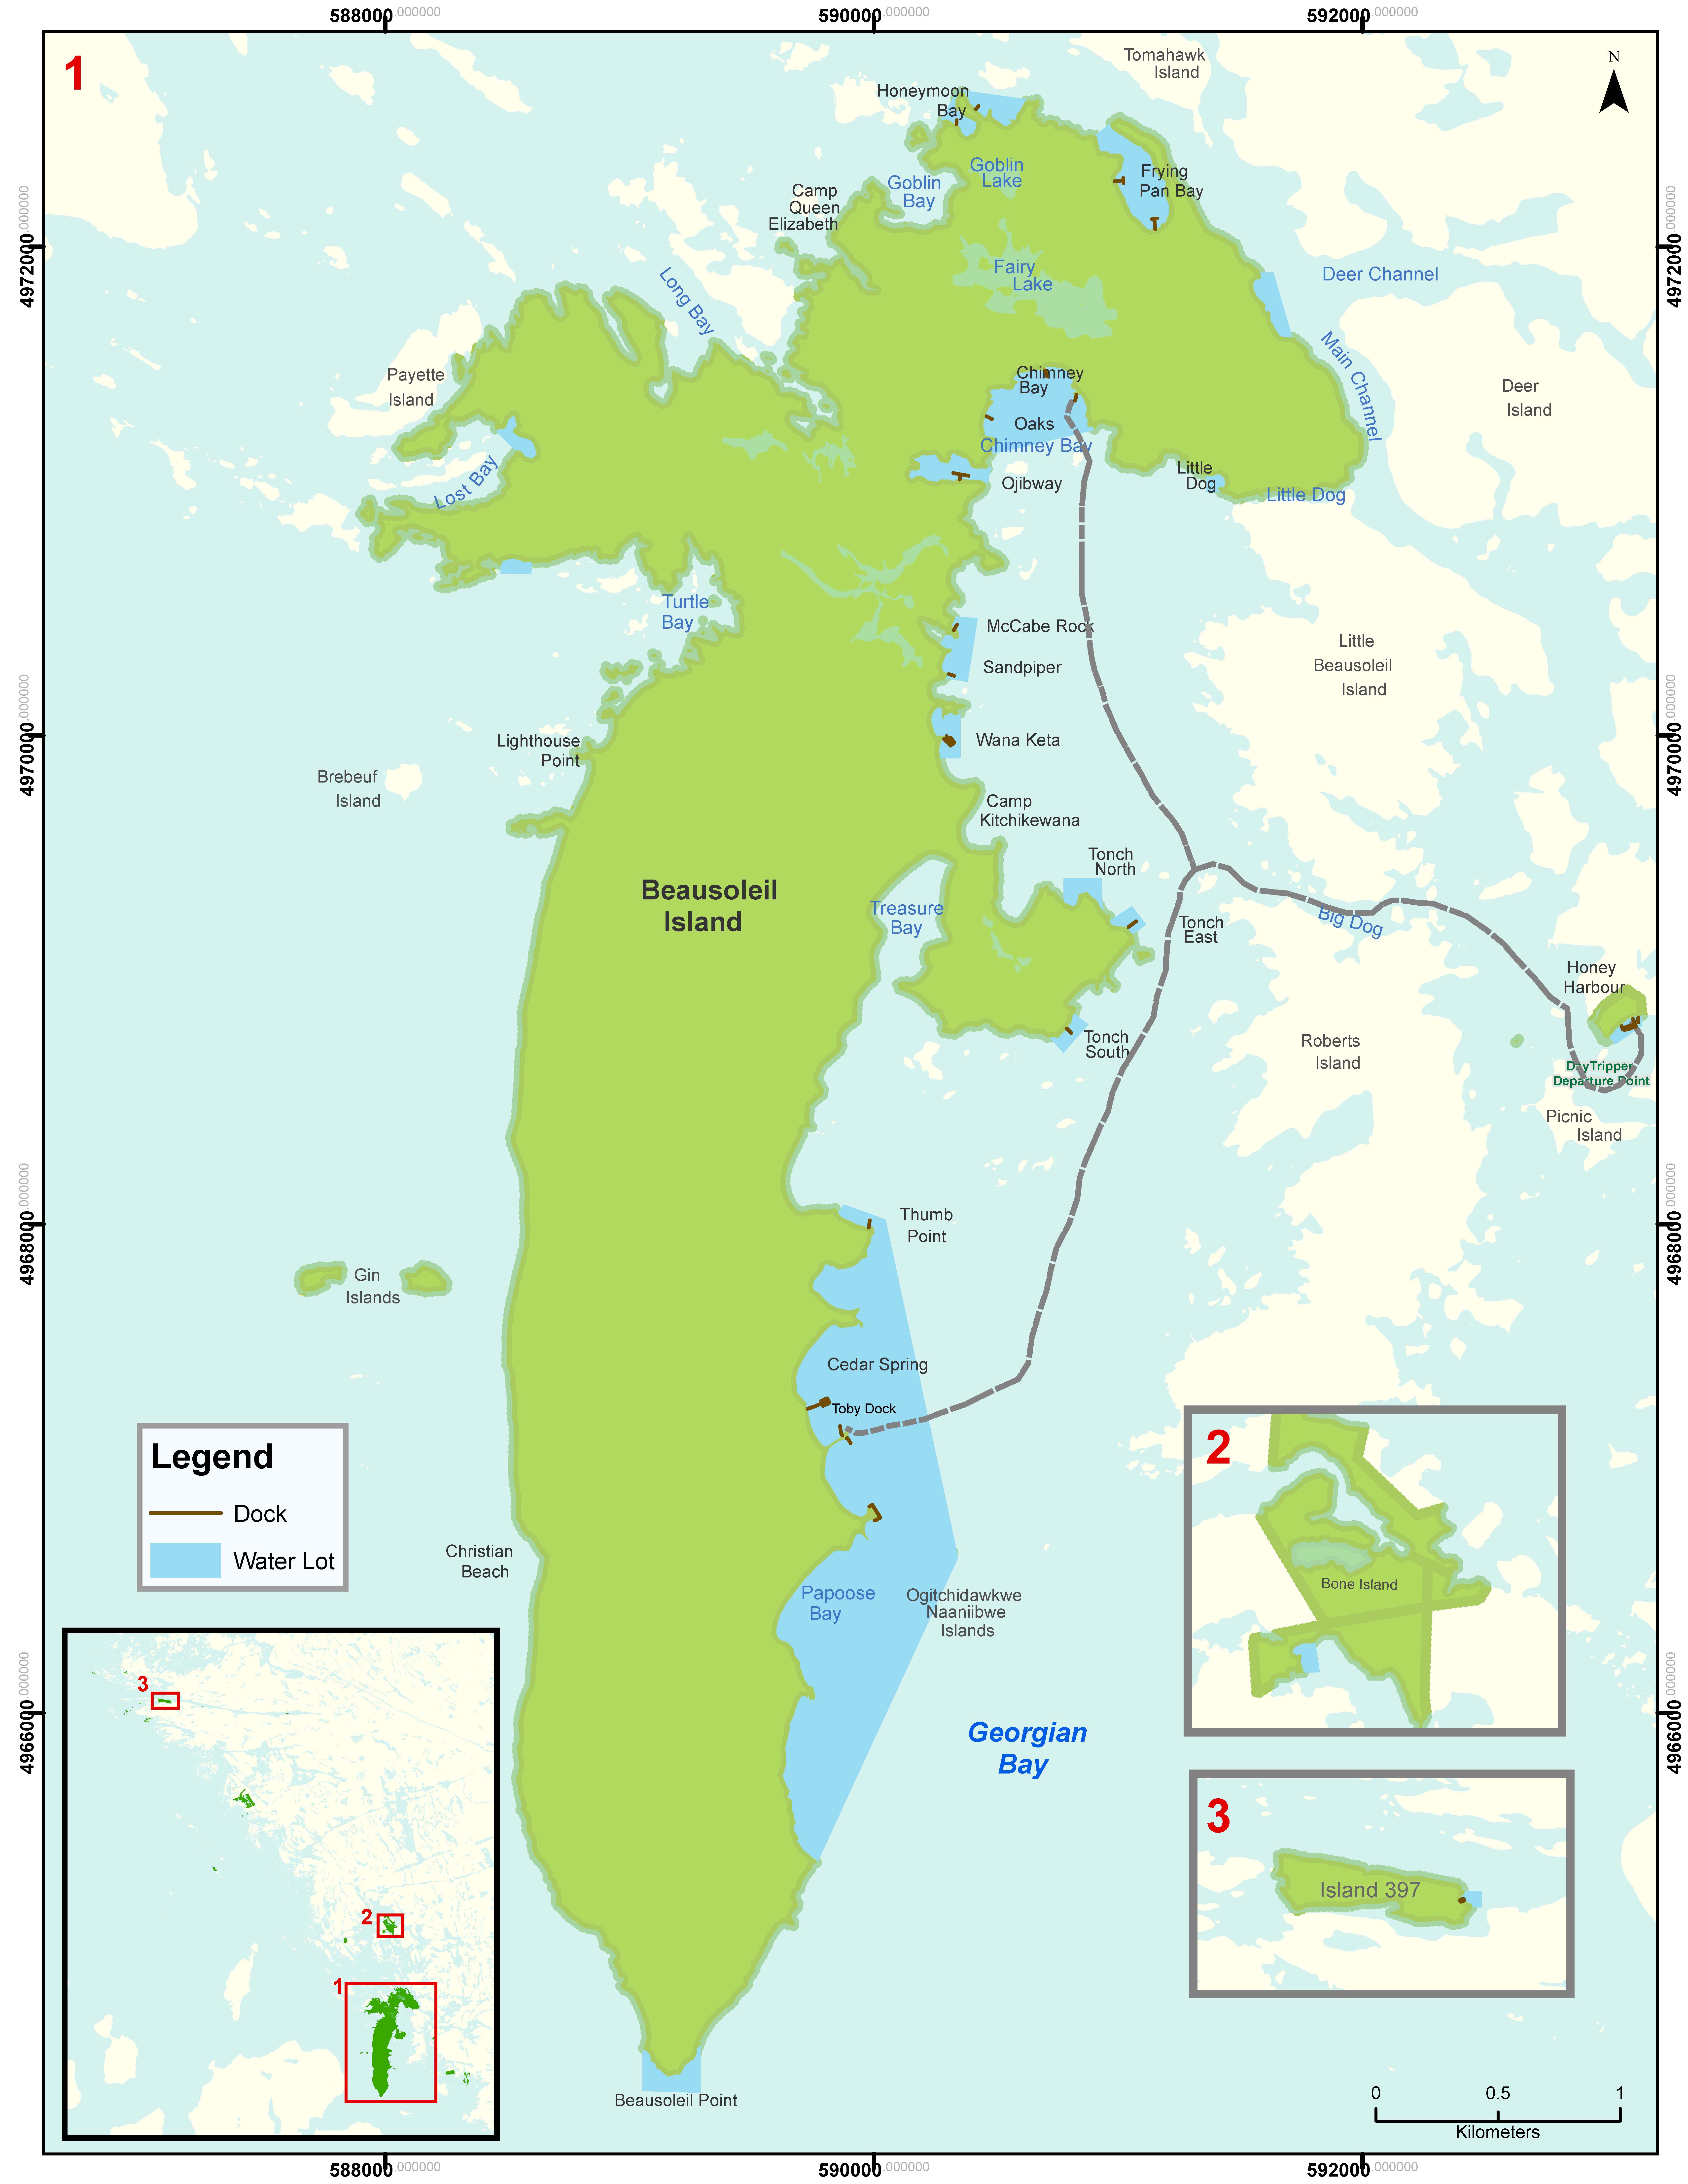 Map of Georgian Bay Islands National Park of Canada with colour to indicate its boundary, docks and water lot.